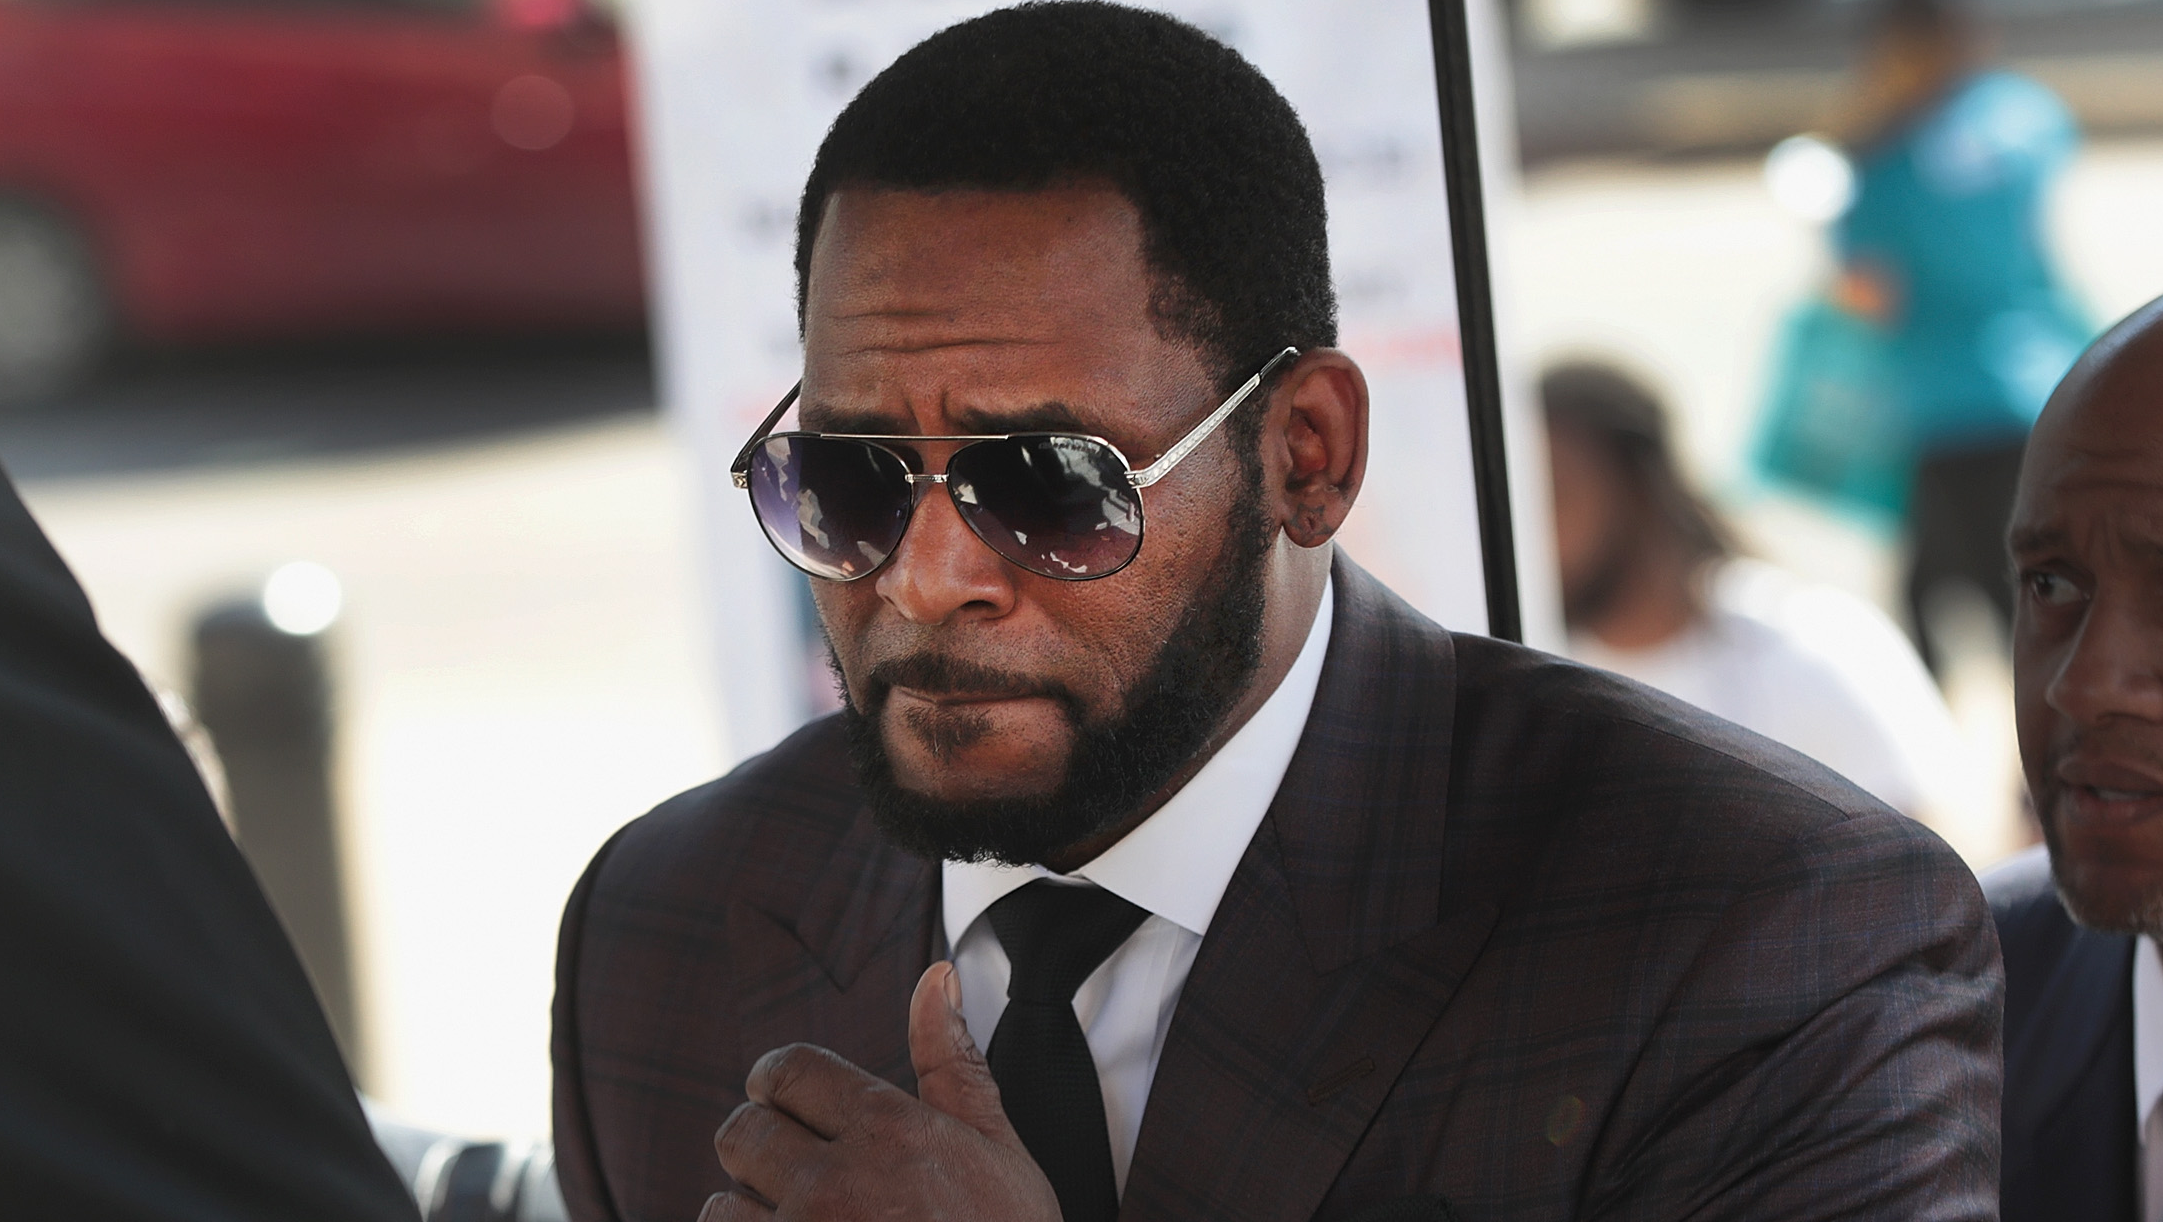 R. Kelly Accused Of Plotting To Blackmail Alleged Victims, Threatened To Hurt Their Families